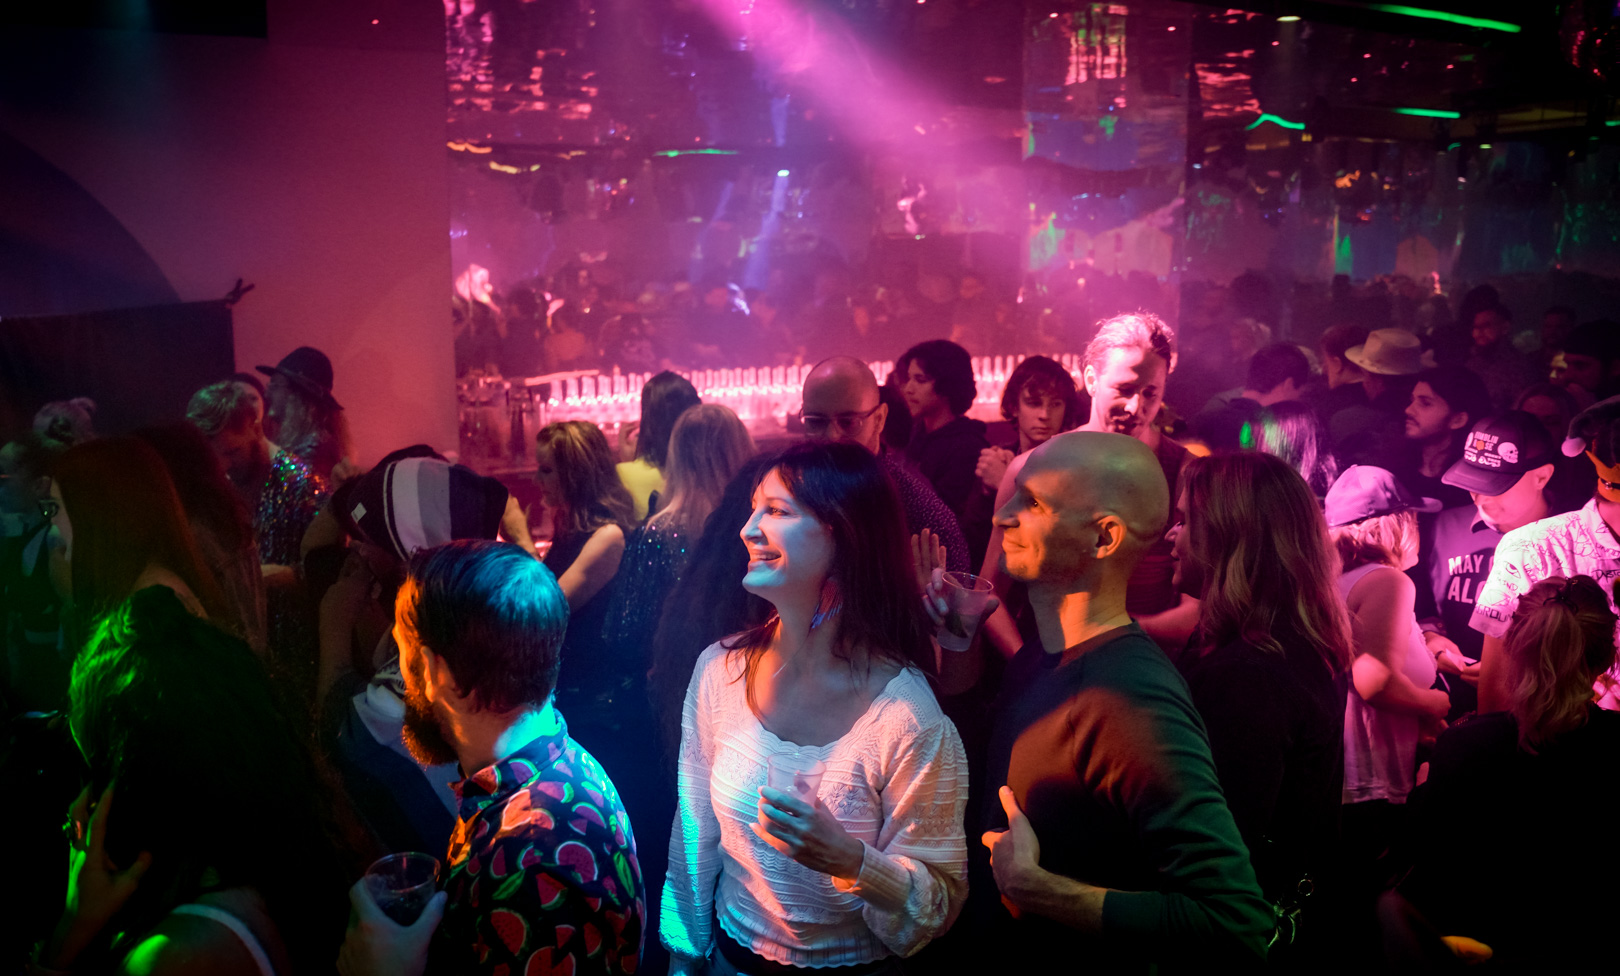 A full crowd dancing in a bar with disco lights